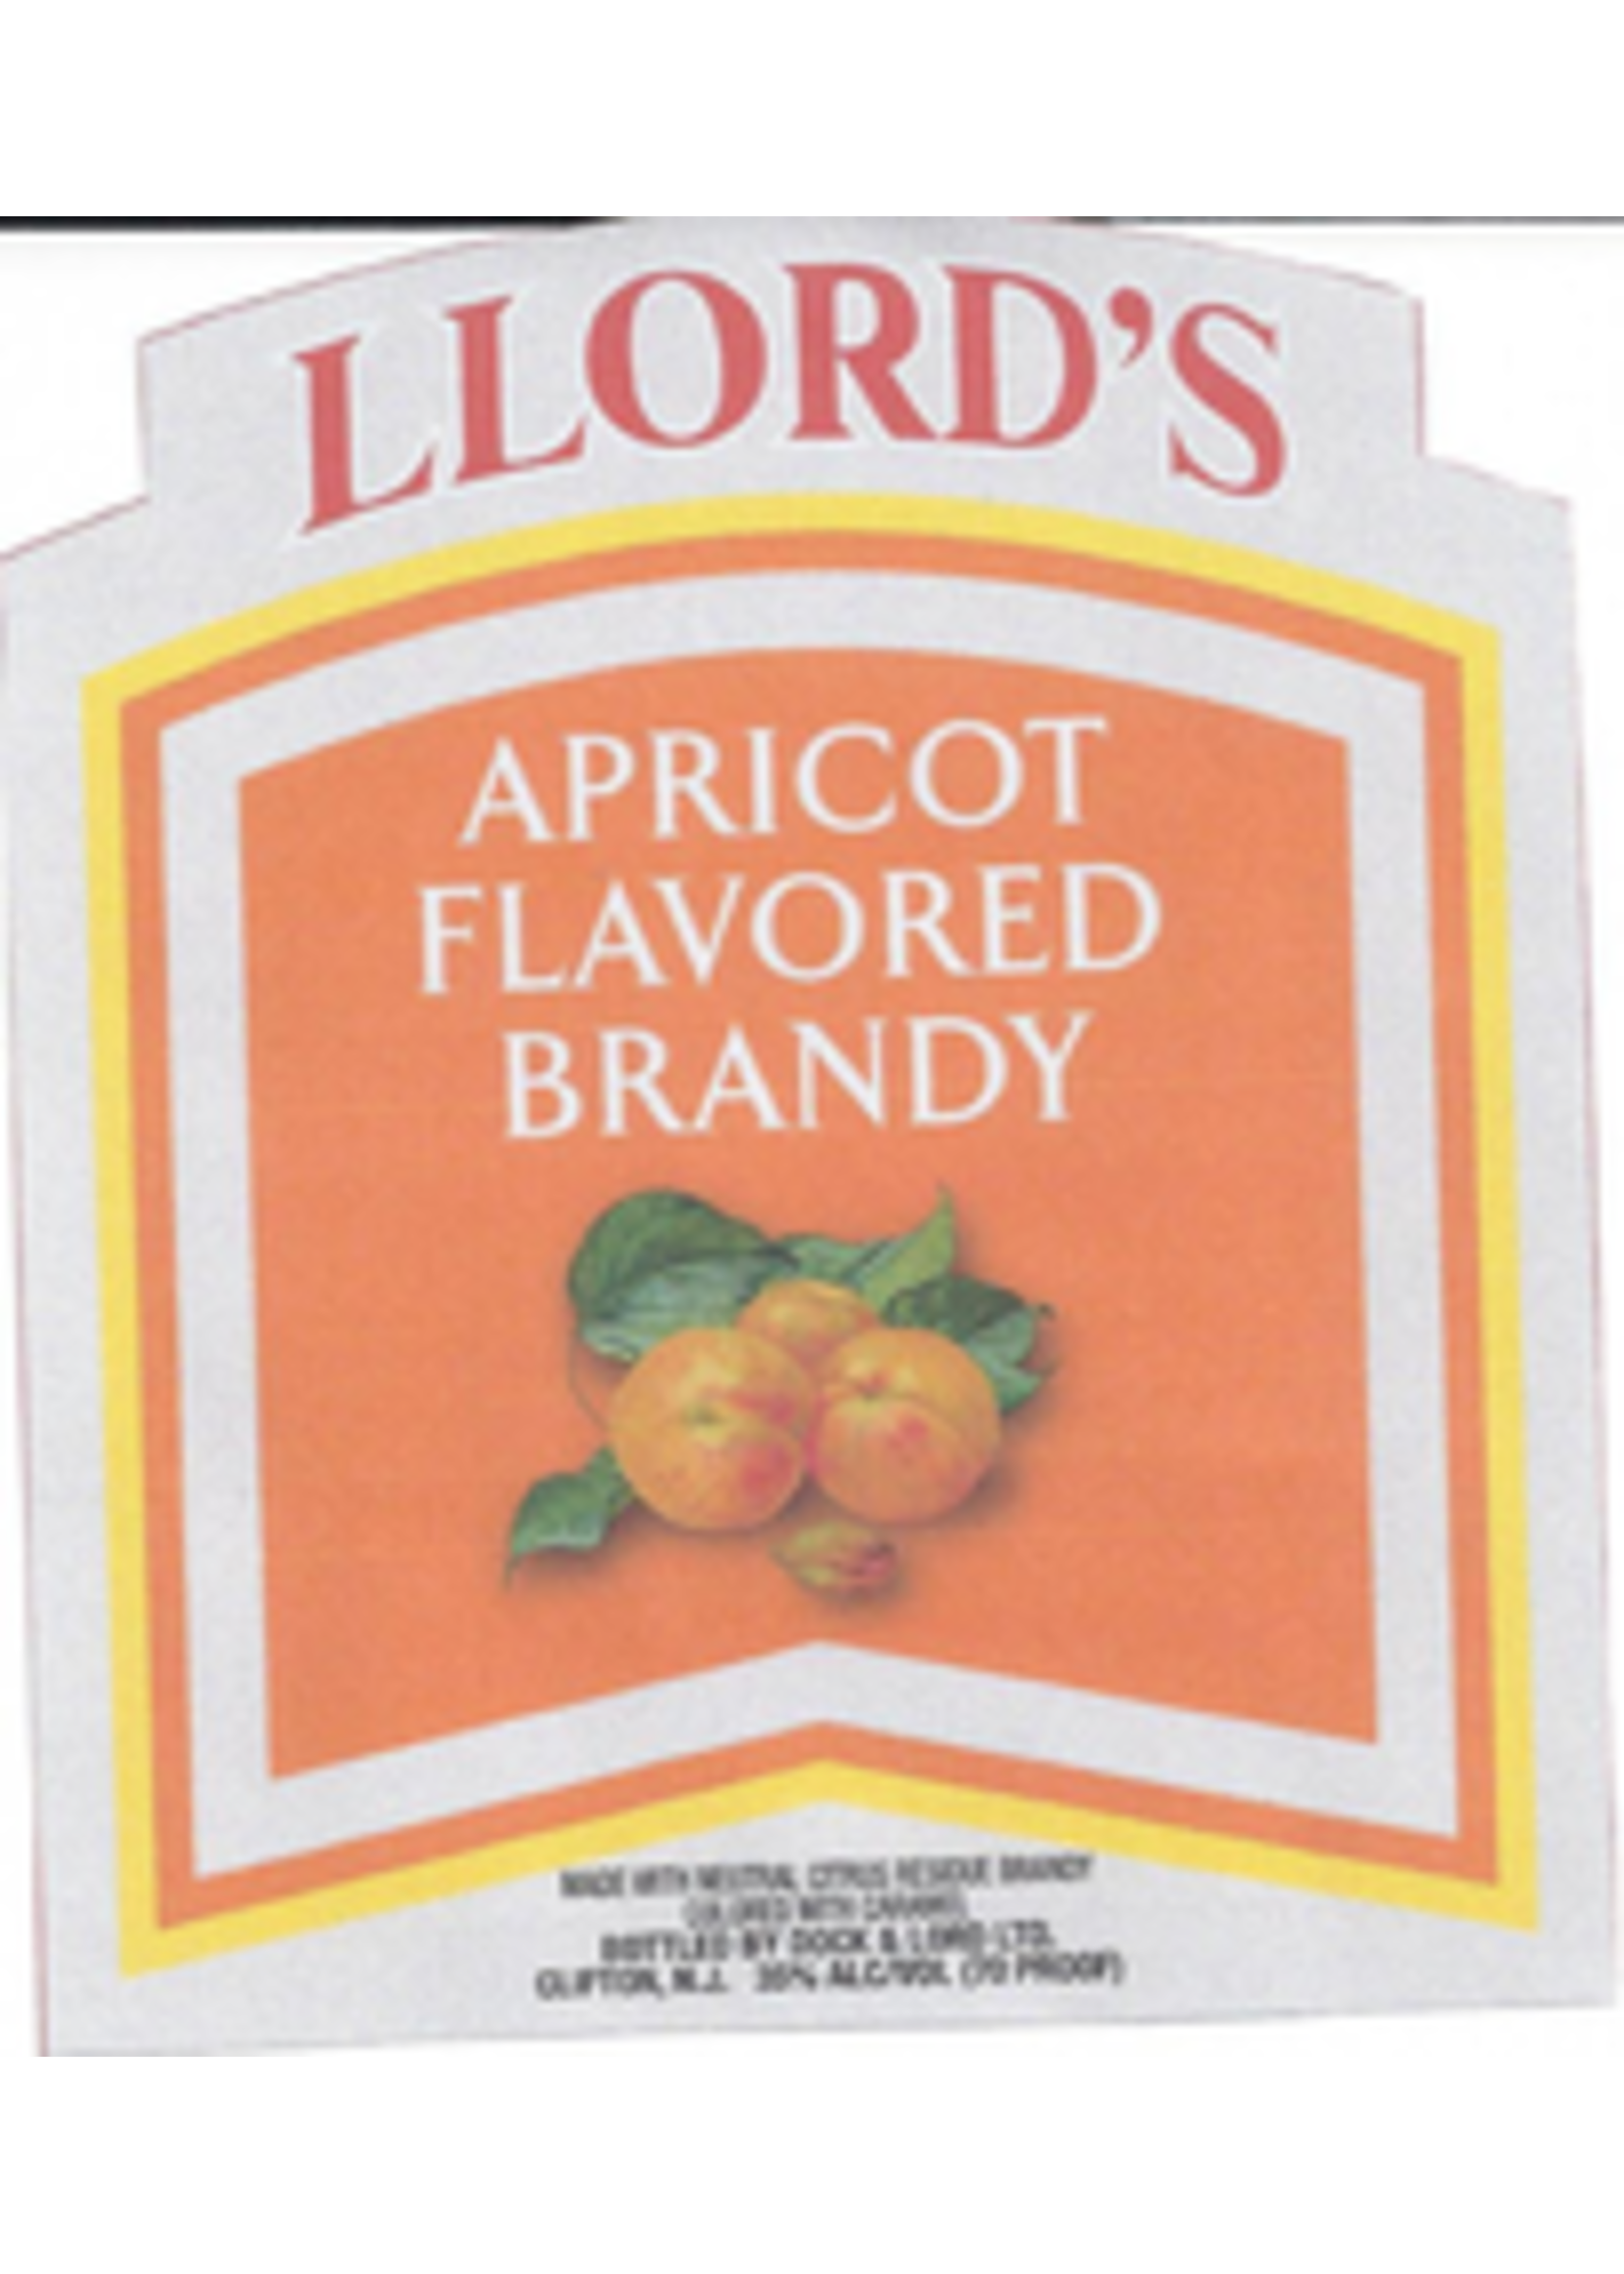 Llord's Llord's / Apricot Brandy / 375mL